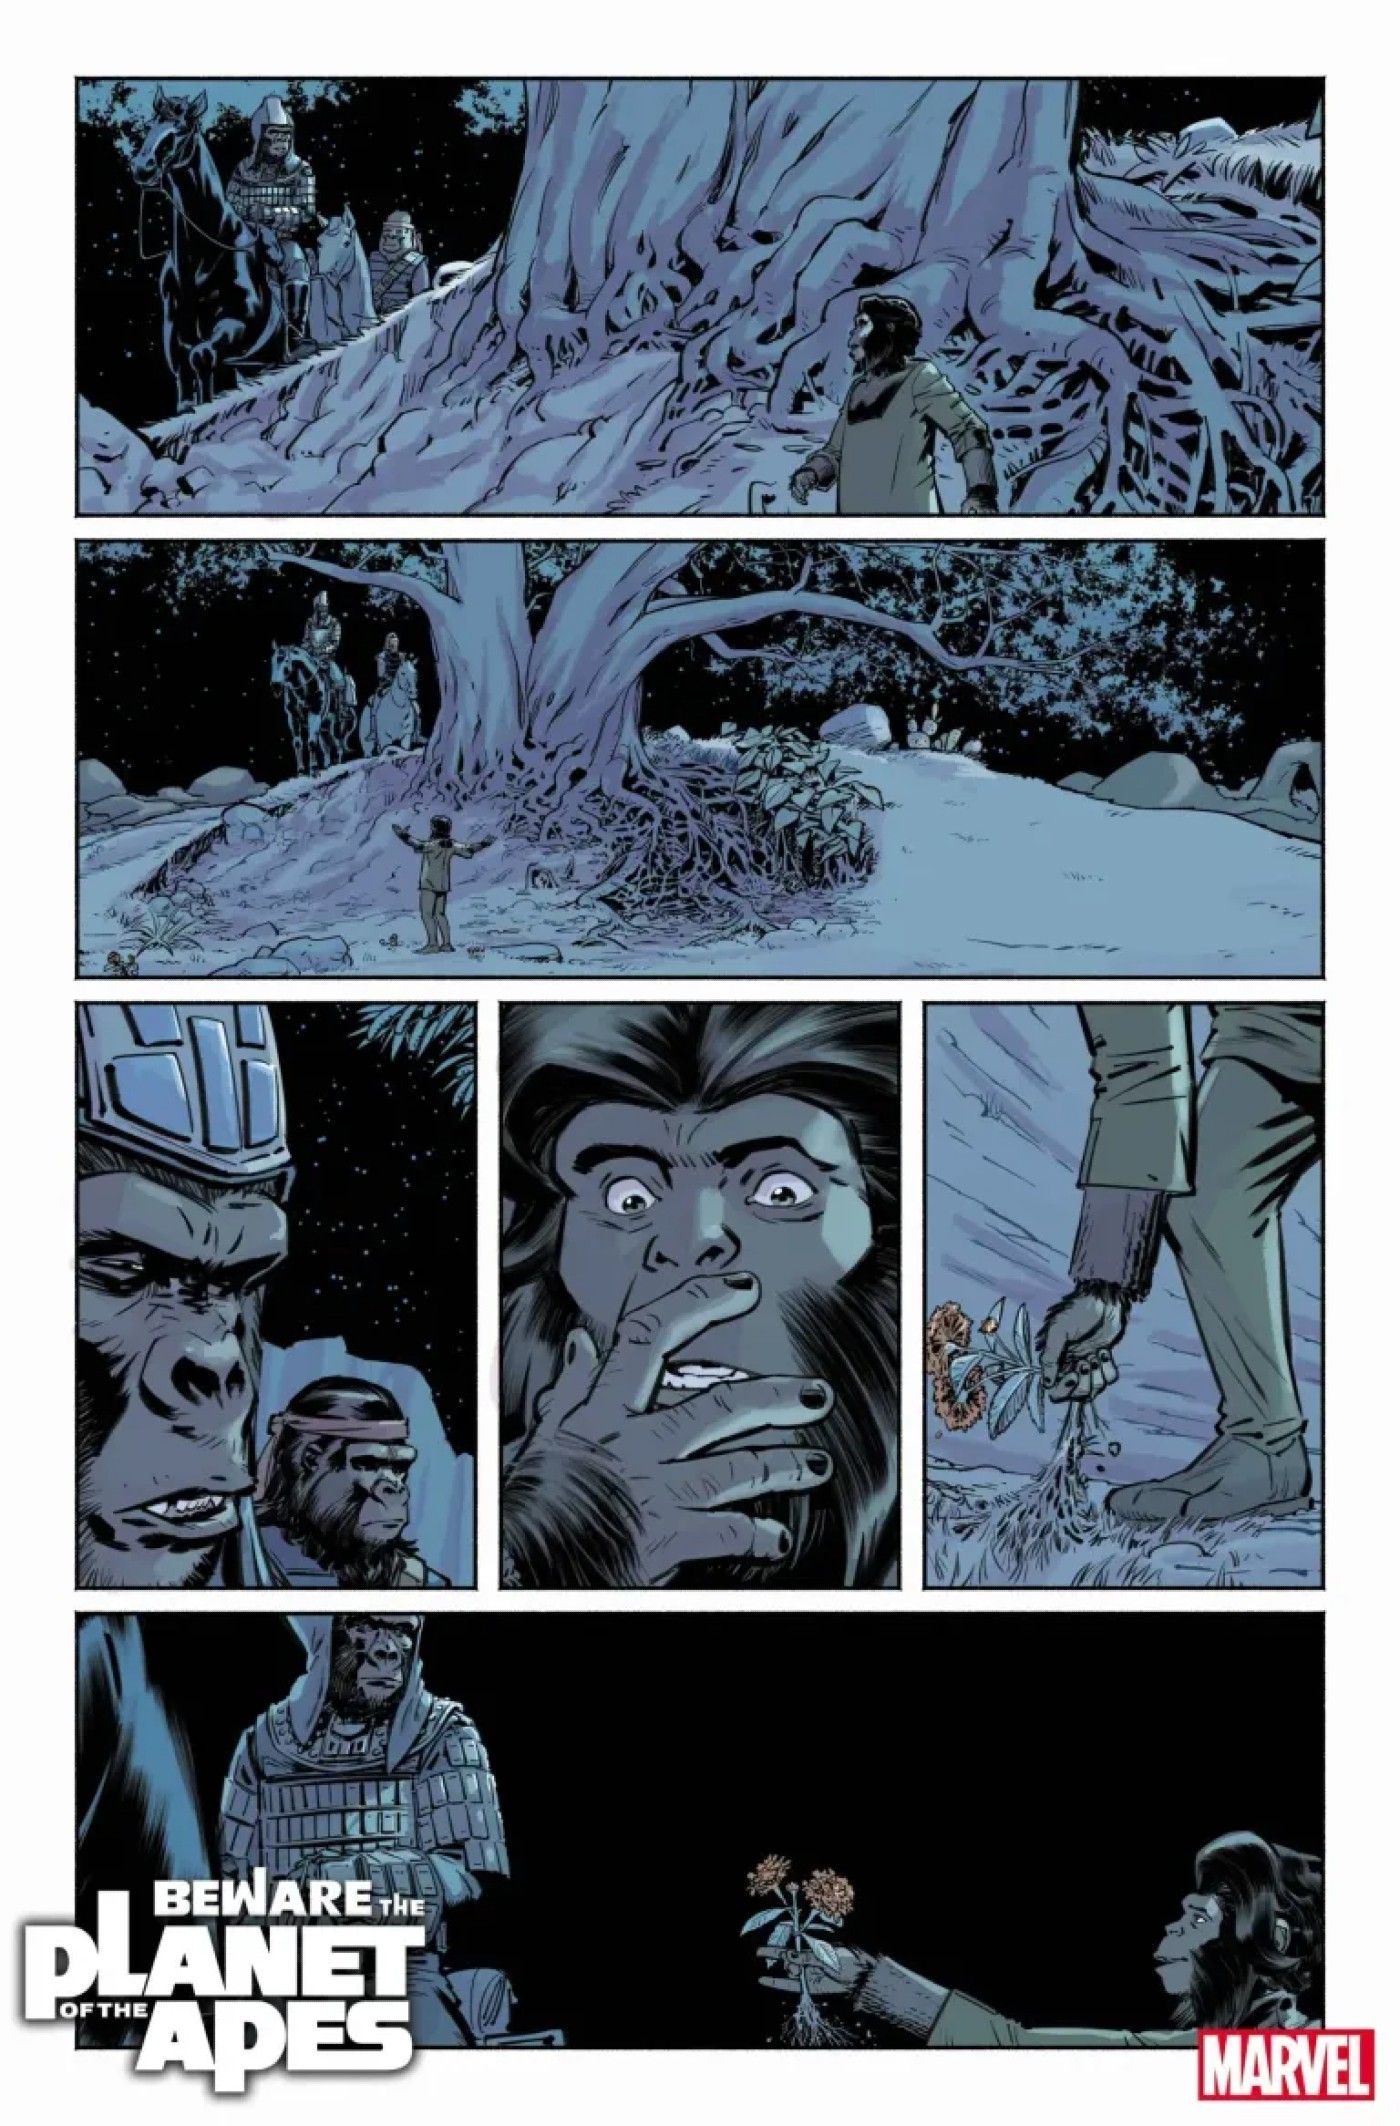 BEWARE THE PLANET OF THE APES 1 PREVIEW PAGE 4